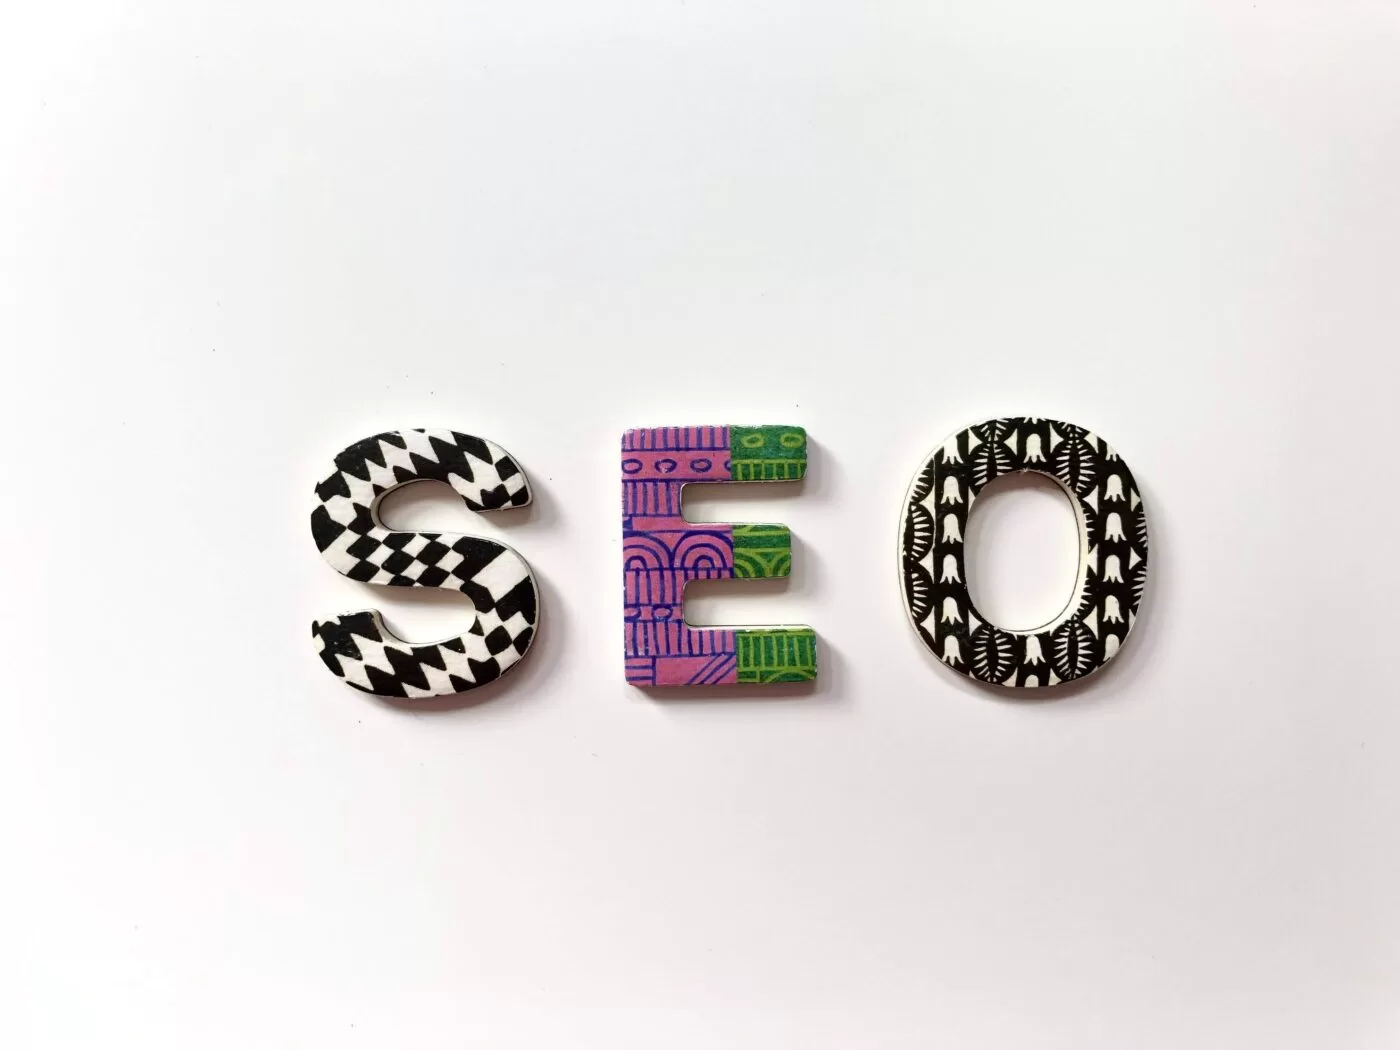 SEO letters out of colourful patterns 